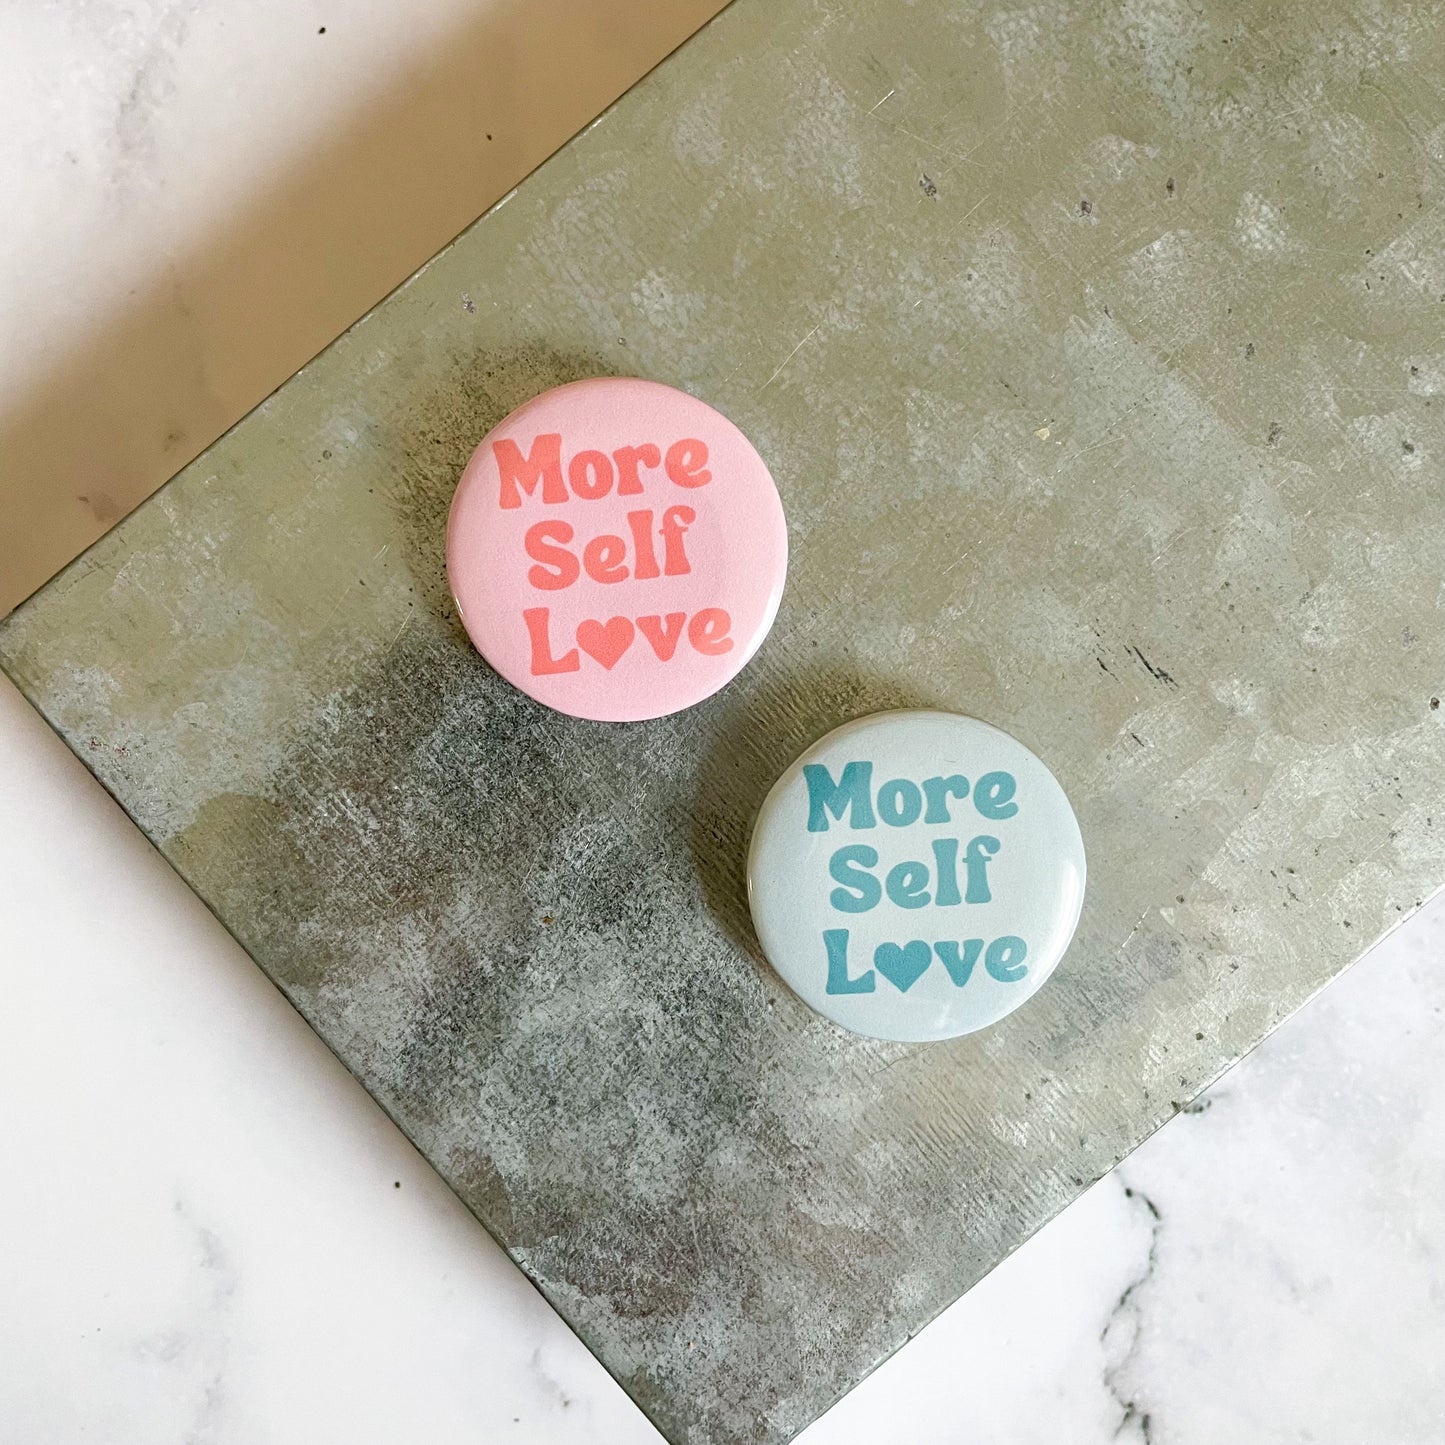 More Self Love (Turquoise) Button / Badge (Buy 4 Get 1 FREE)